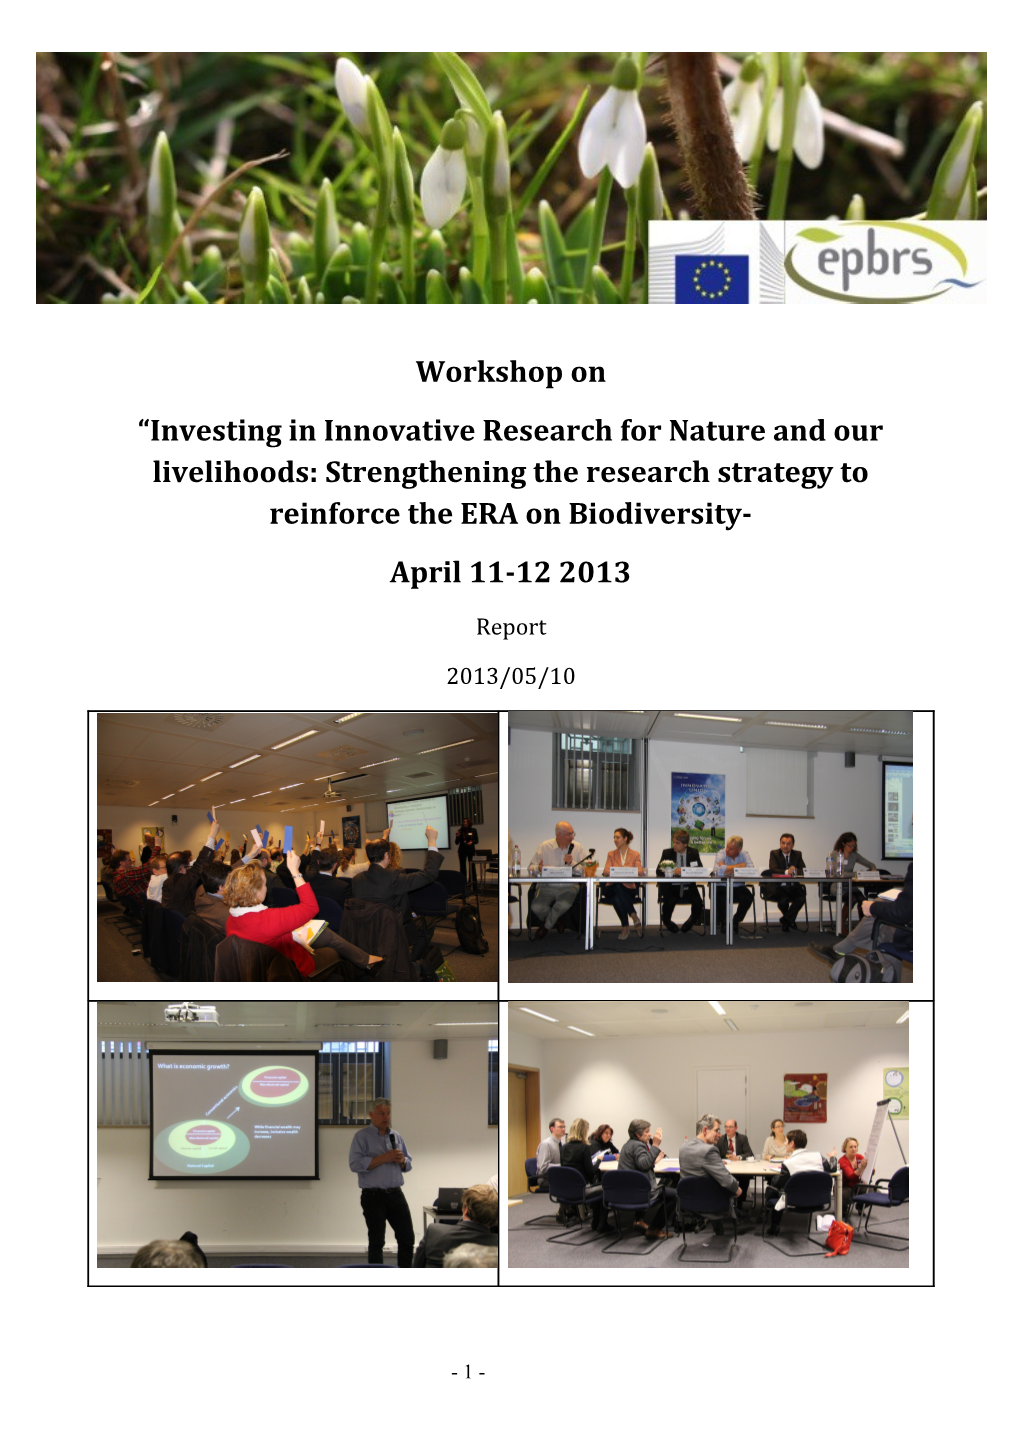 Investing in Innovative Research for Nature and Our Livelihoods: Strengthening the Research